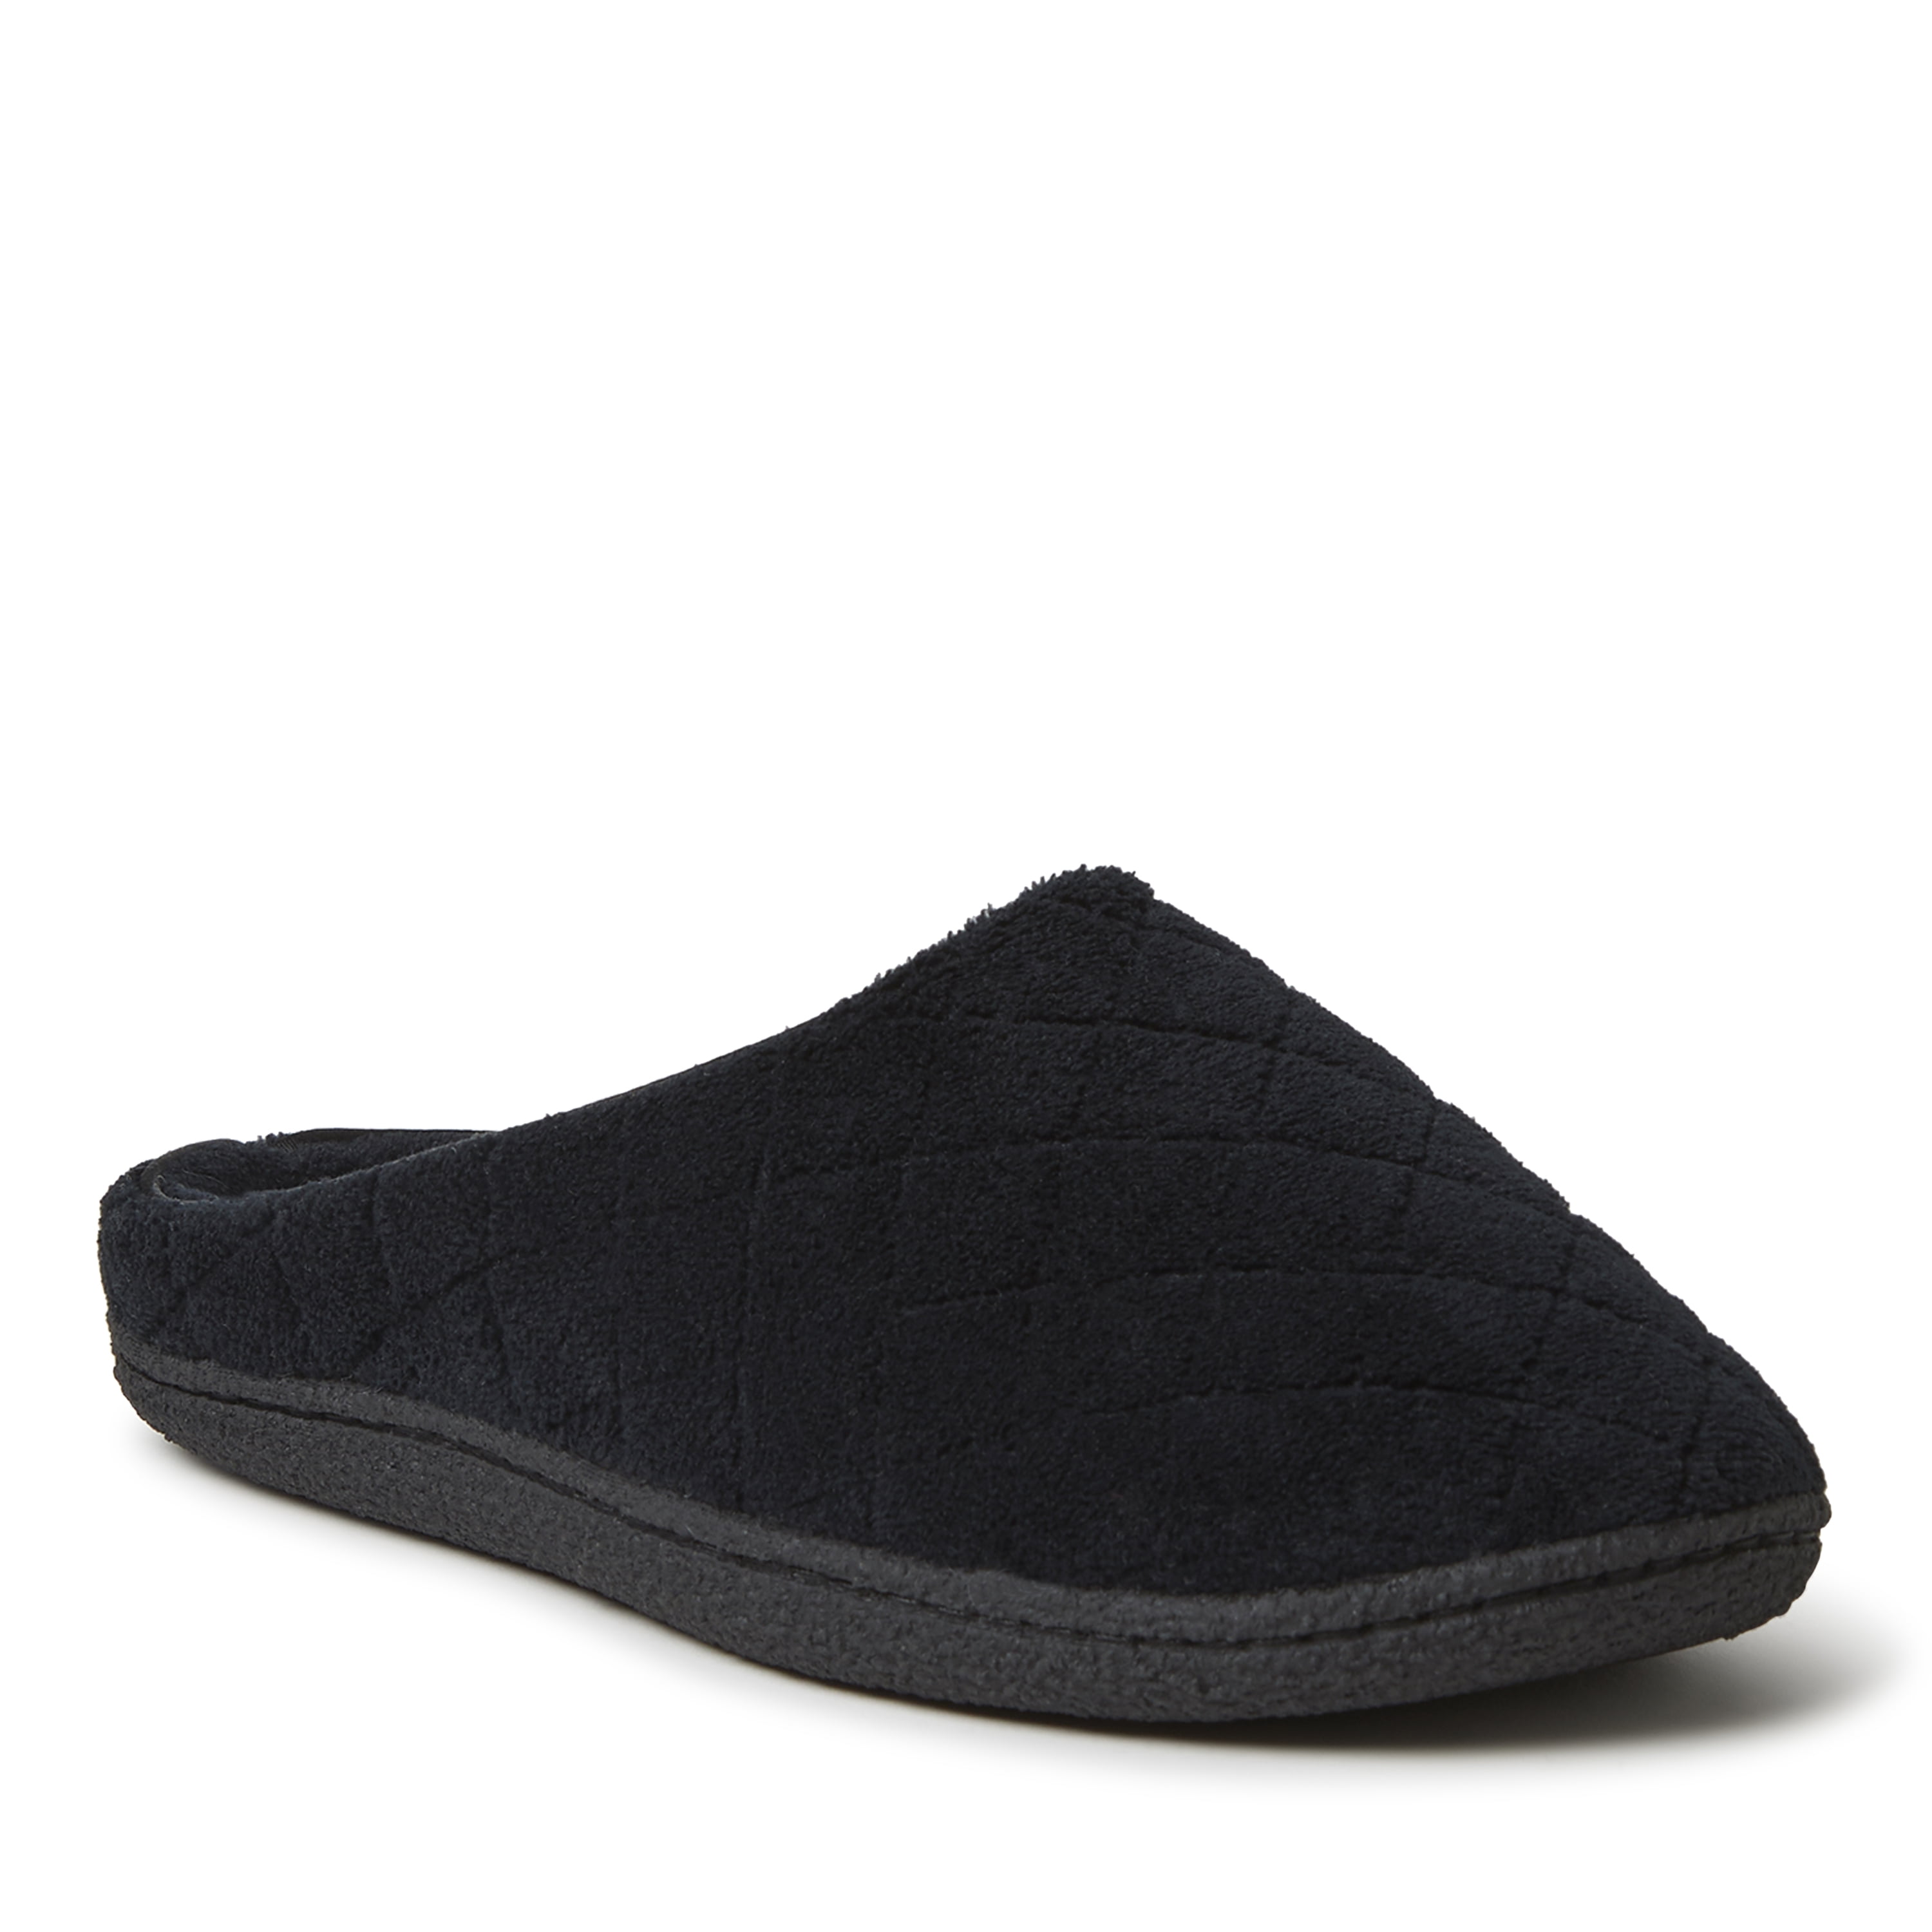 These Memory Foam Slippers Are on Sale at Walmart - Slipper Deals